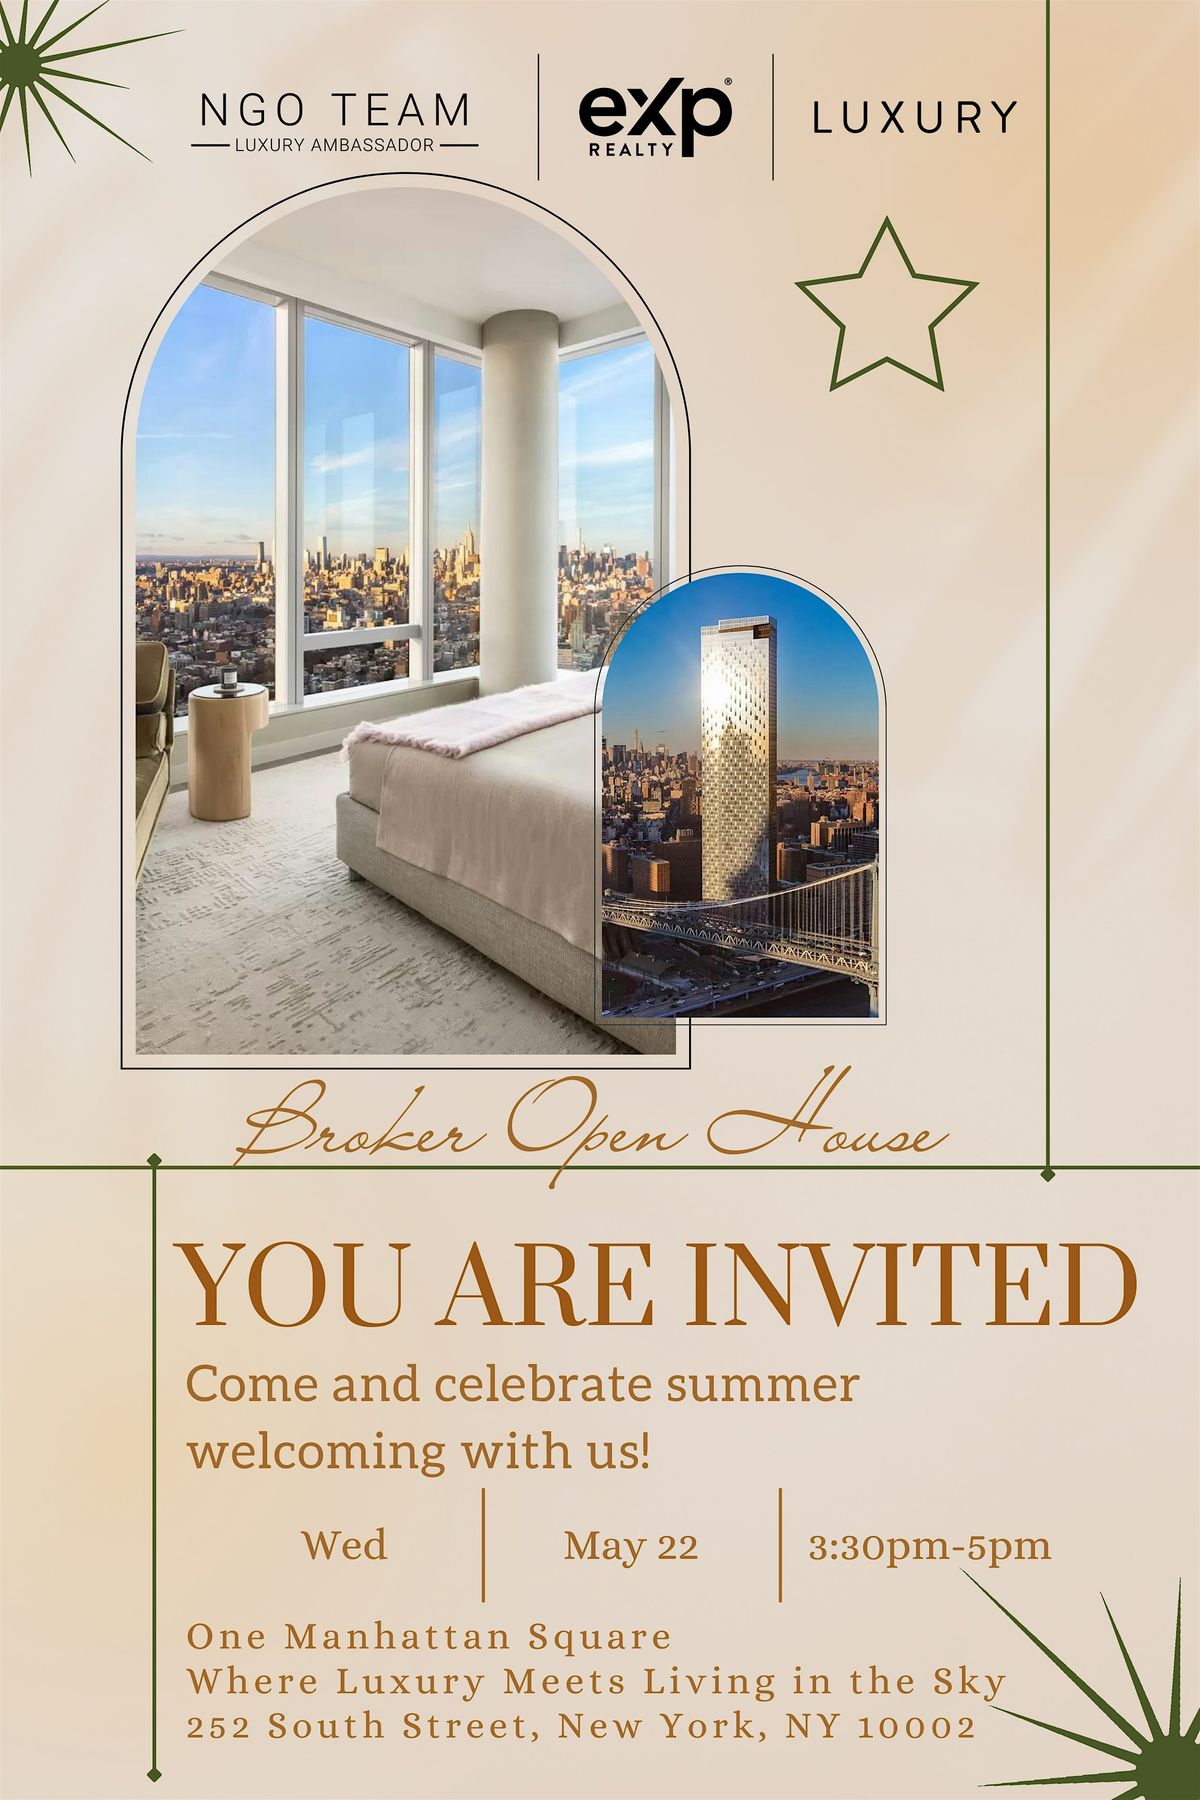 Come and celebrate summer welcoming with us at the most Luxurious Condo